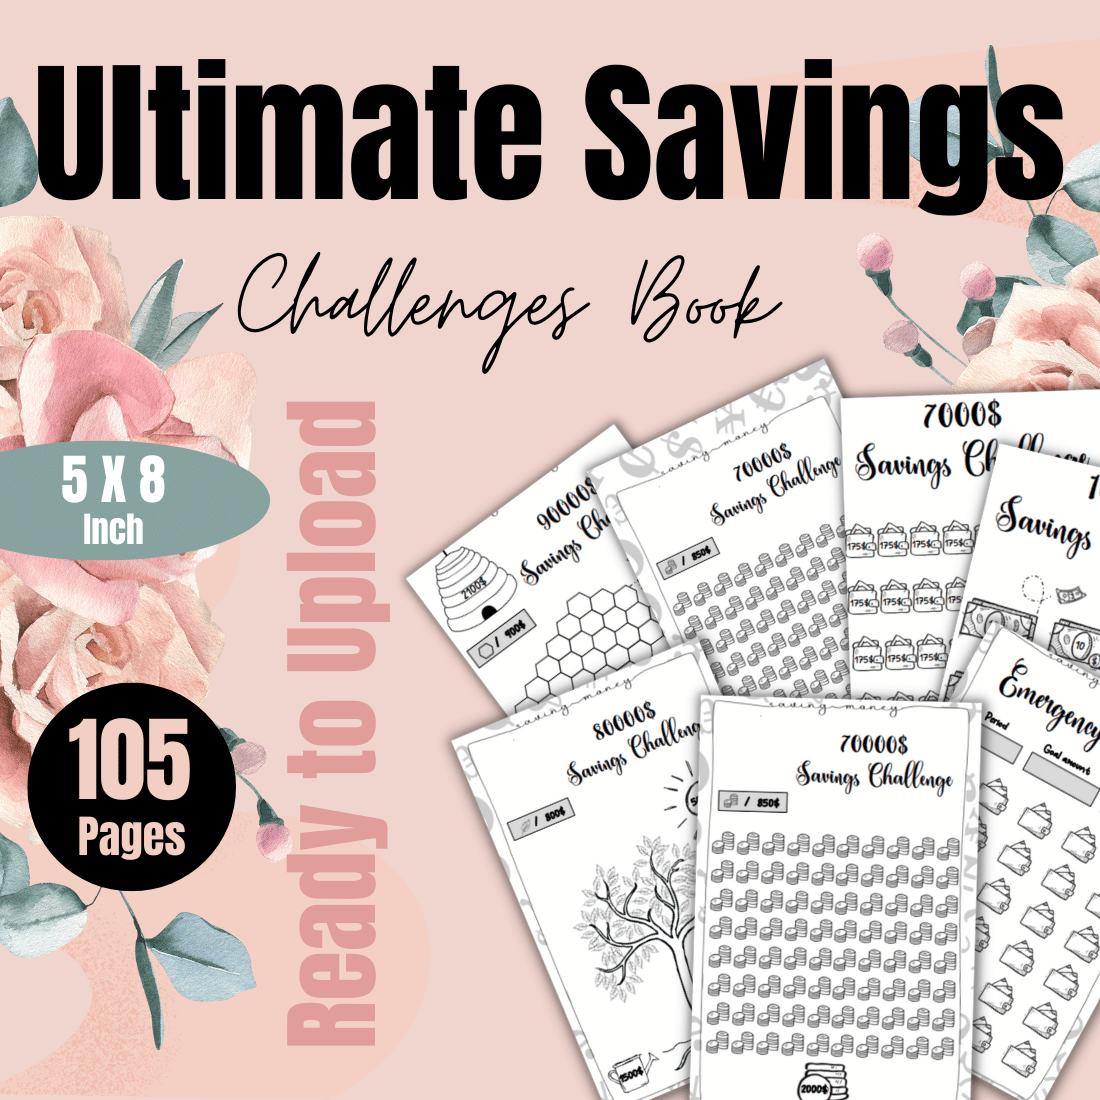 Ultimate Savings Challenges Book Interior main image.